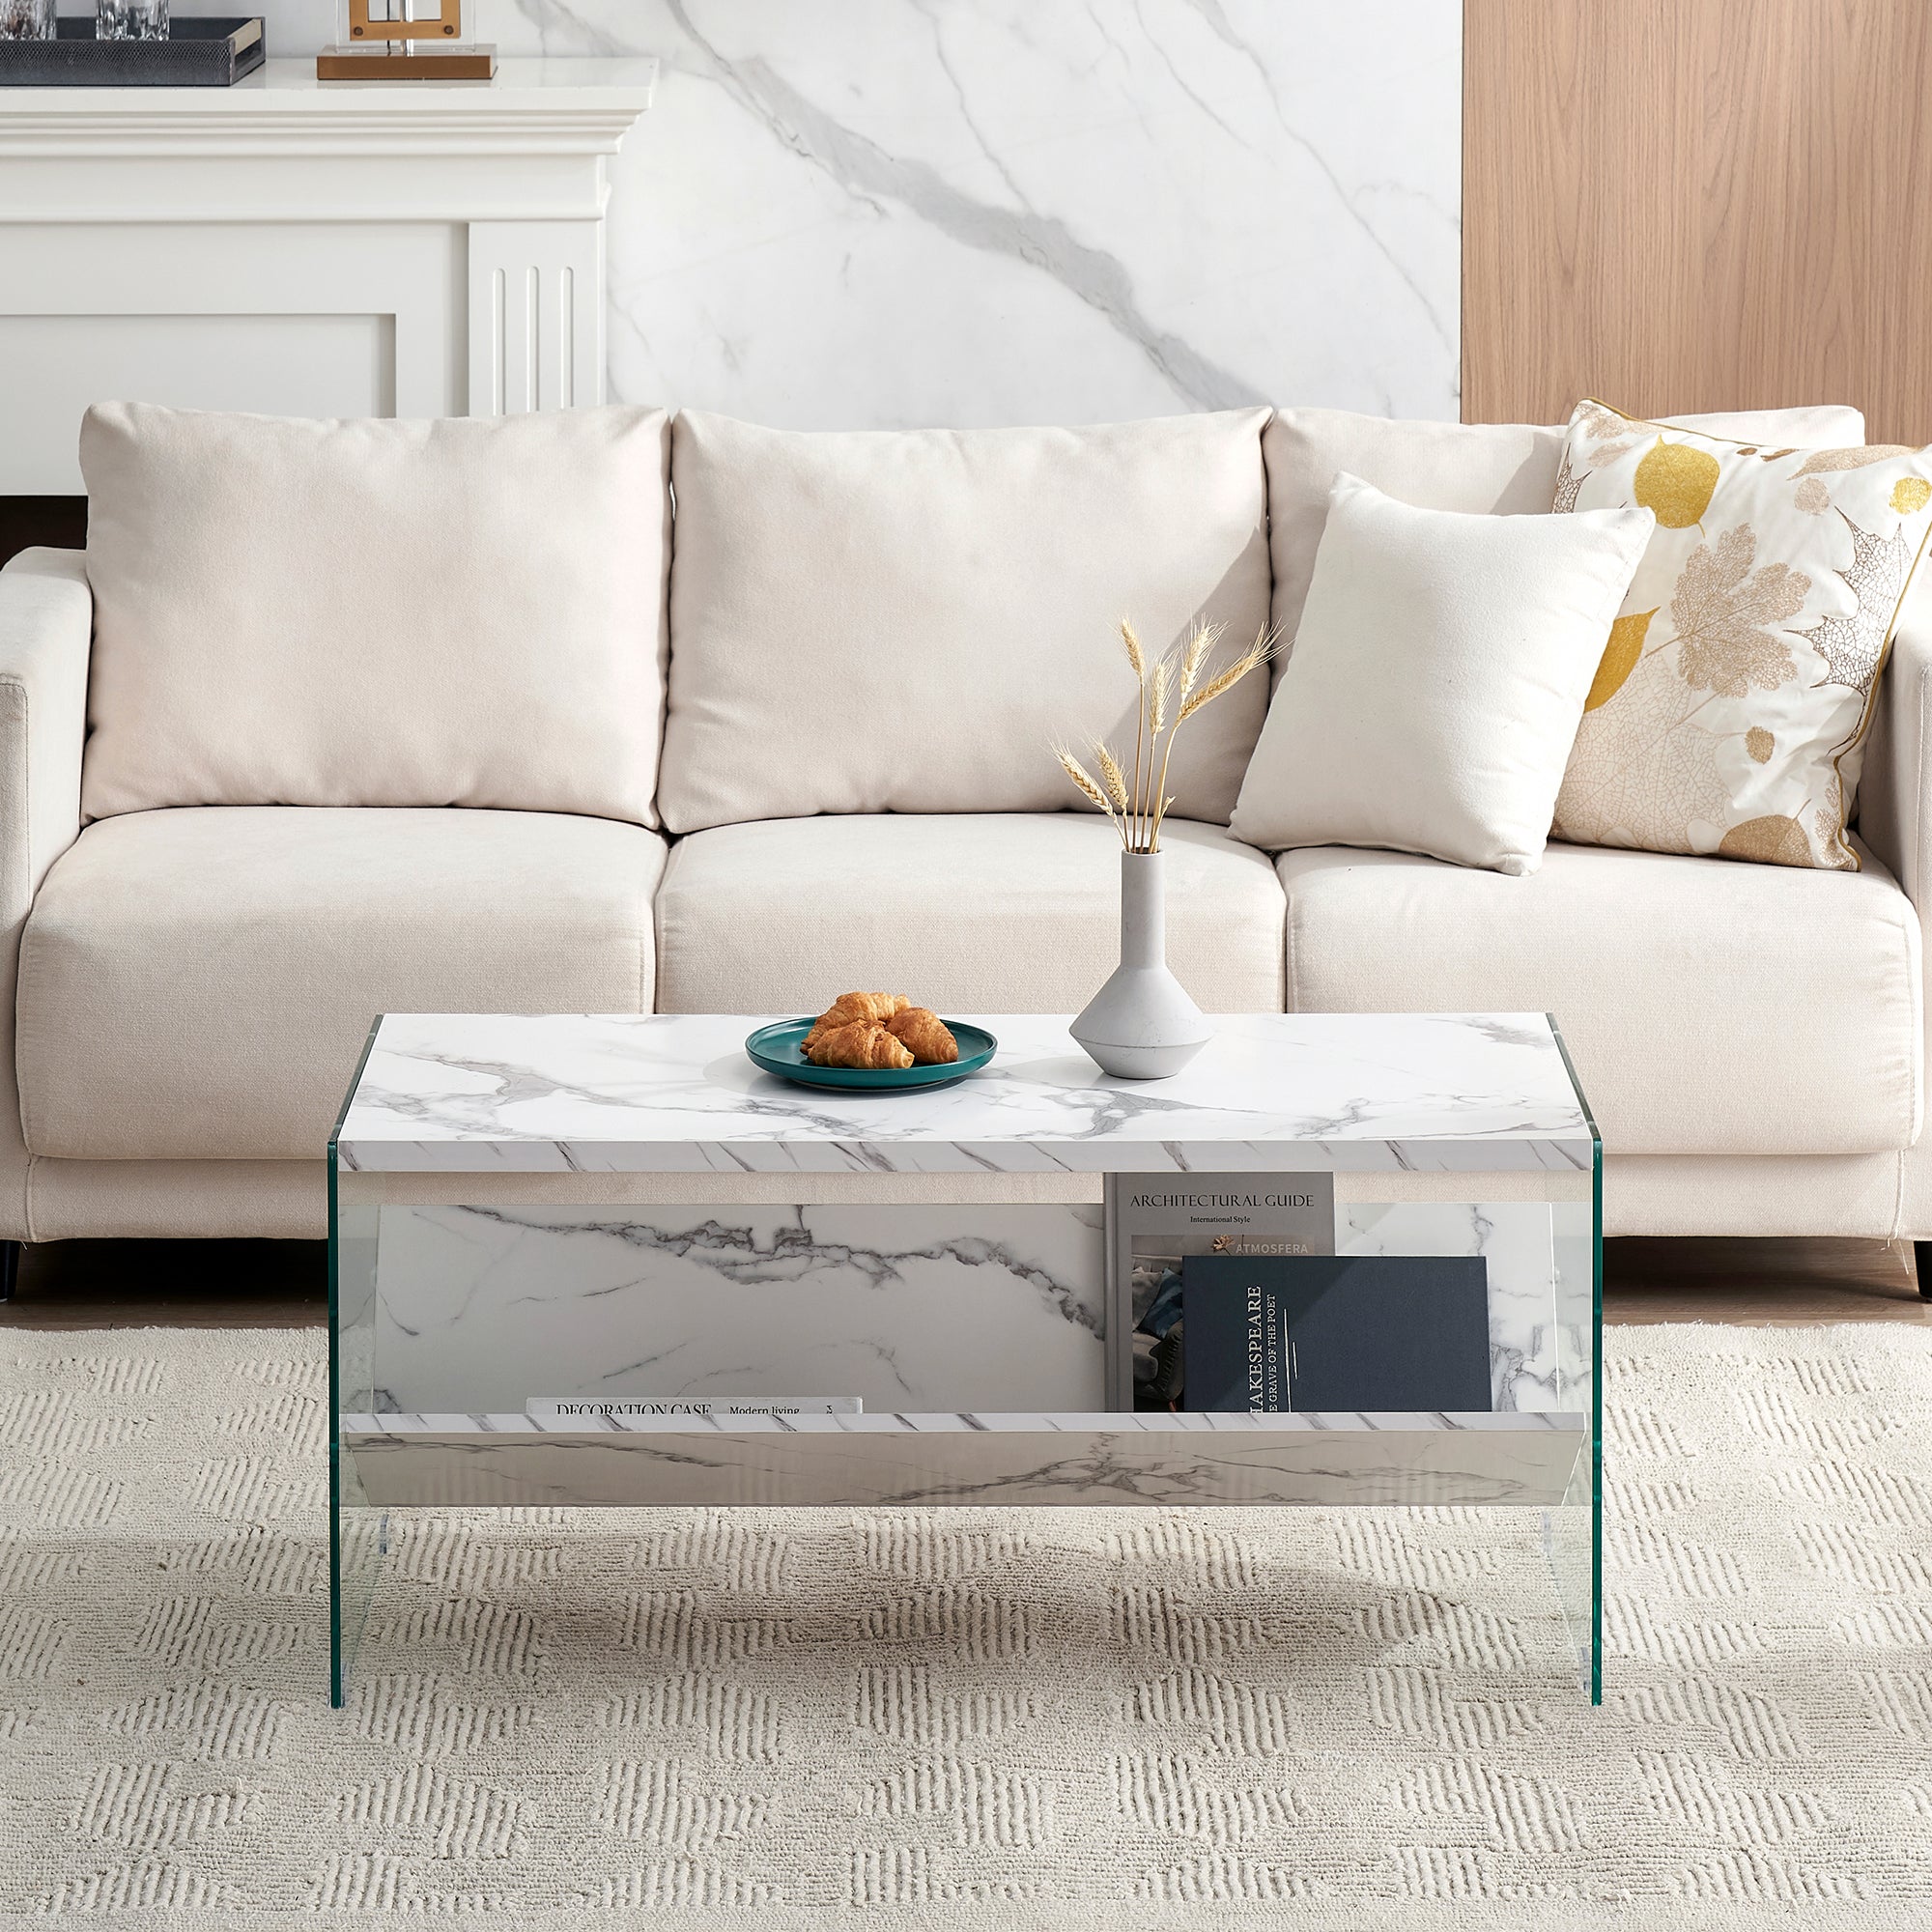 Ivinta Modern Glass Coffee Table，Small Cocktail Table with Storage Shelf